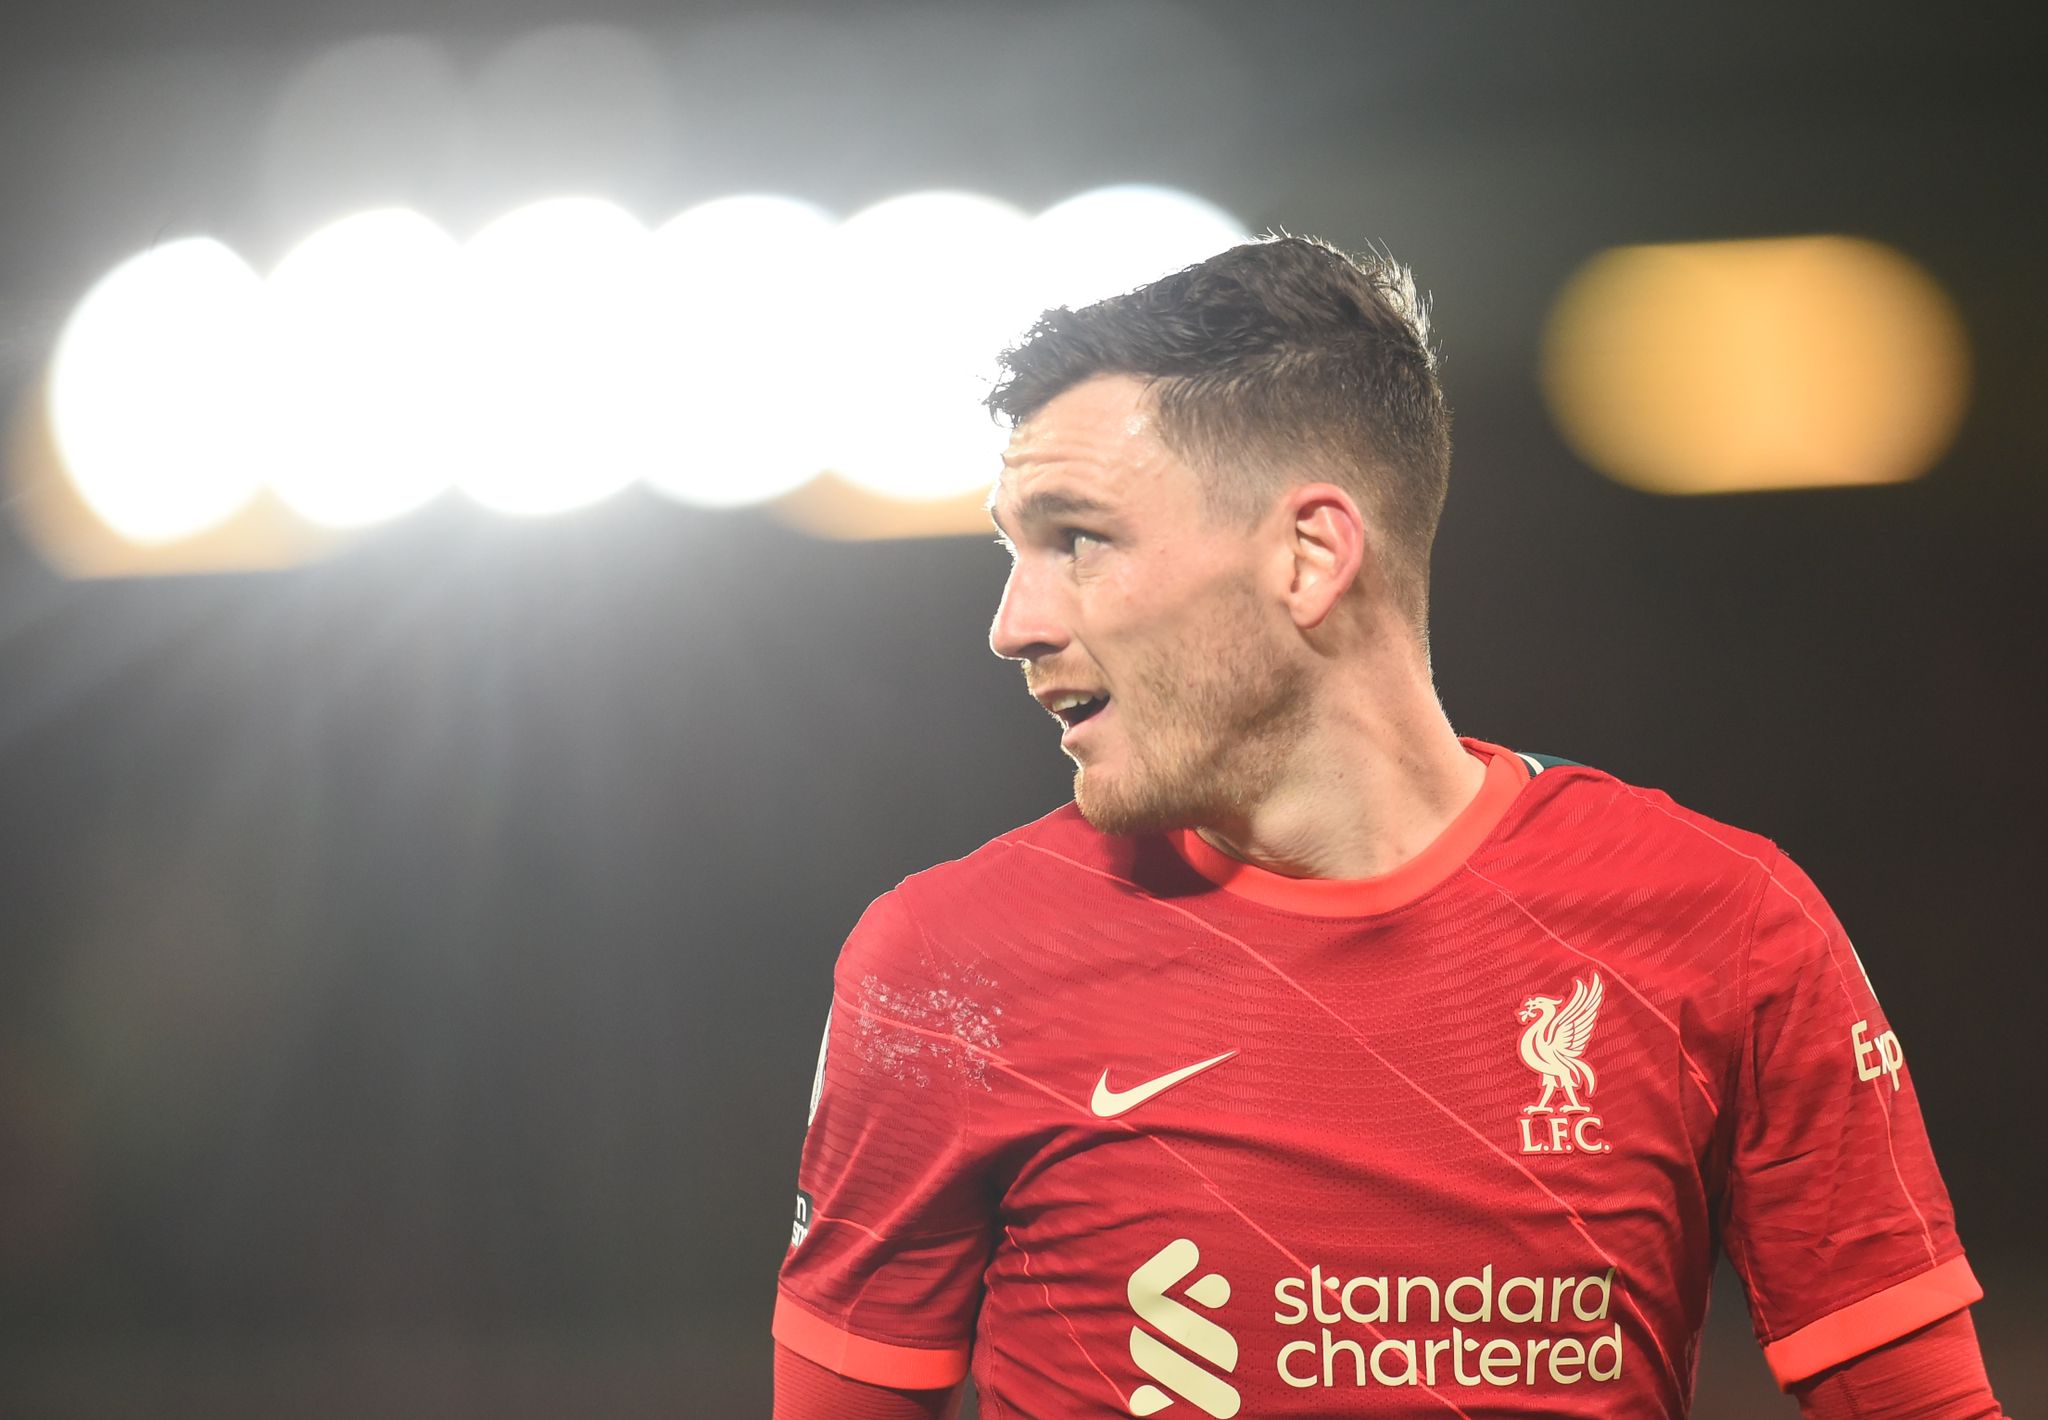 Gap to Manchester City is big but we have to keep putting pressure, claims Andrew Robertson